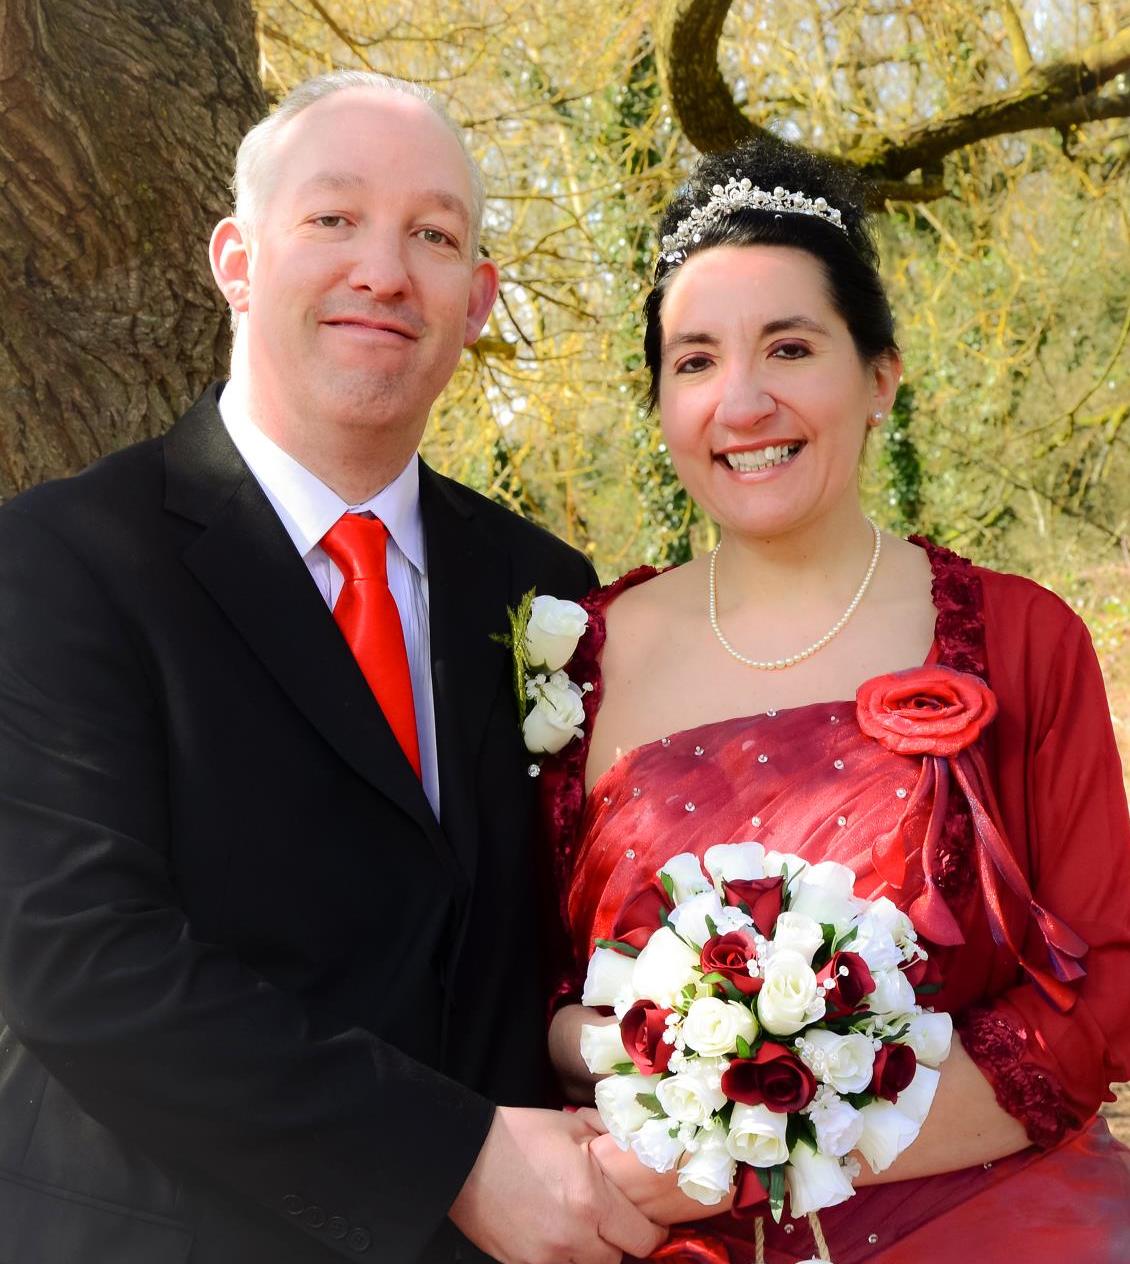 Russell and Lisa Ventura were married in April 2013